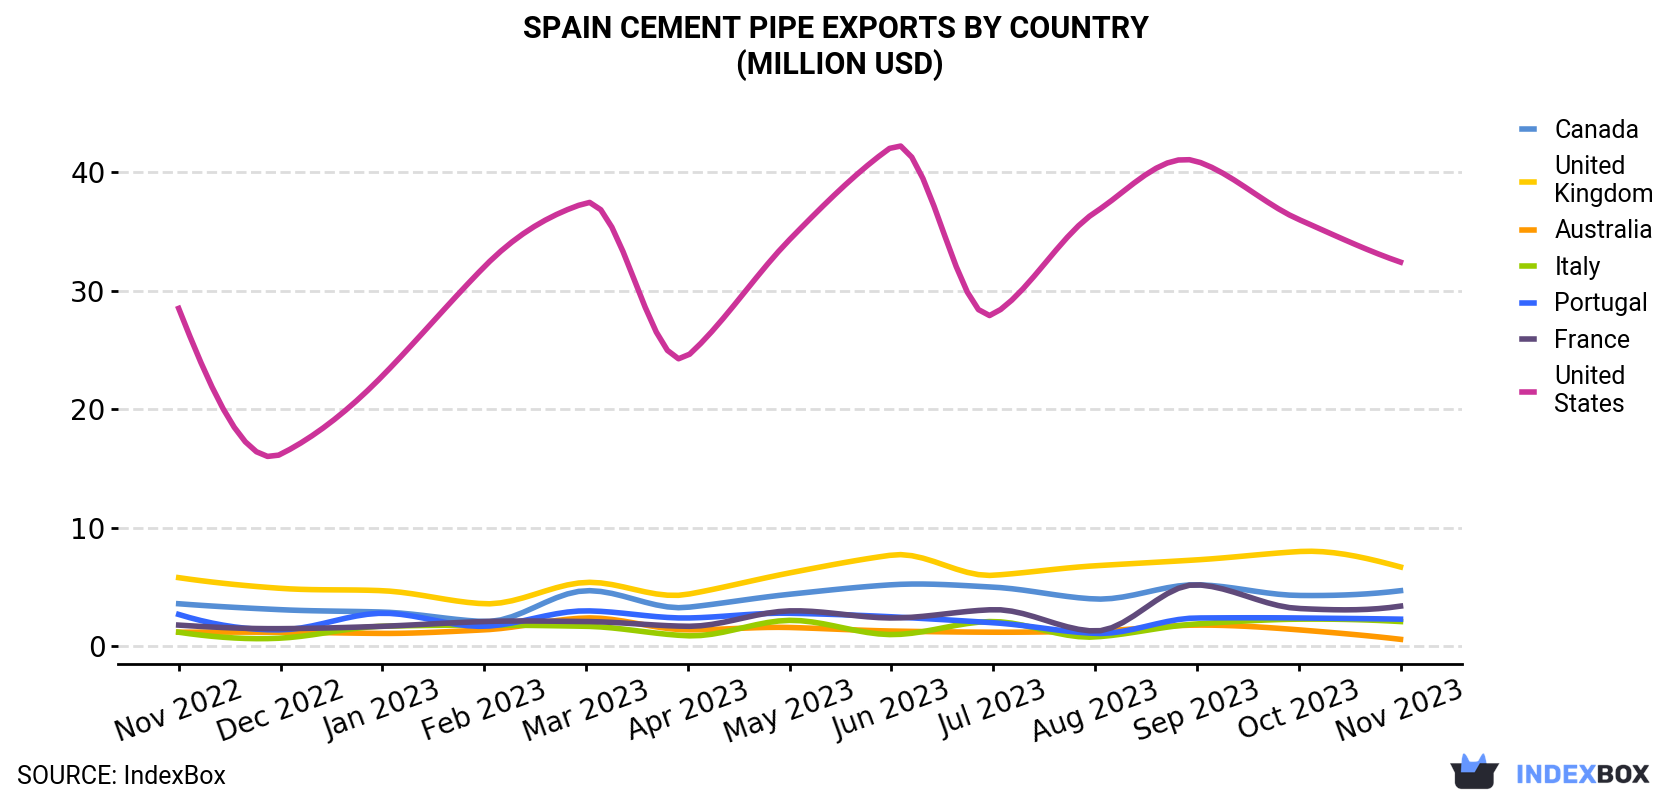 Spain Cement Pipe Exports By Country (Million USD)